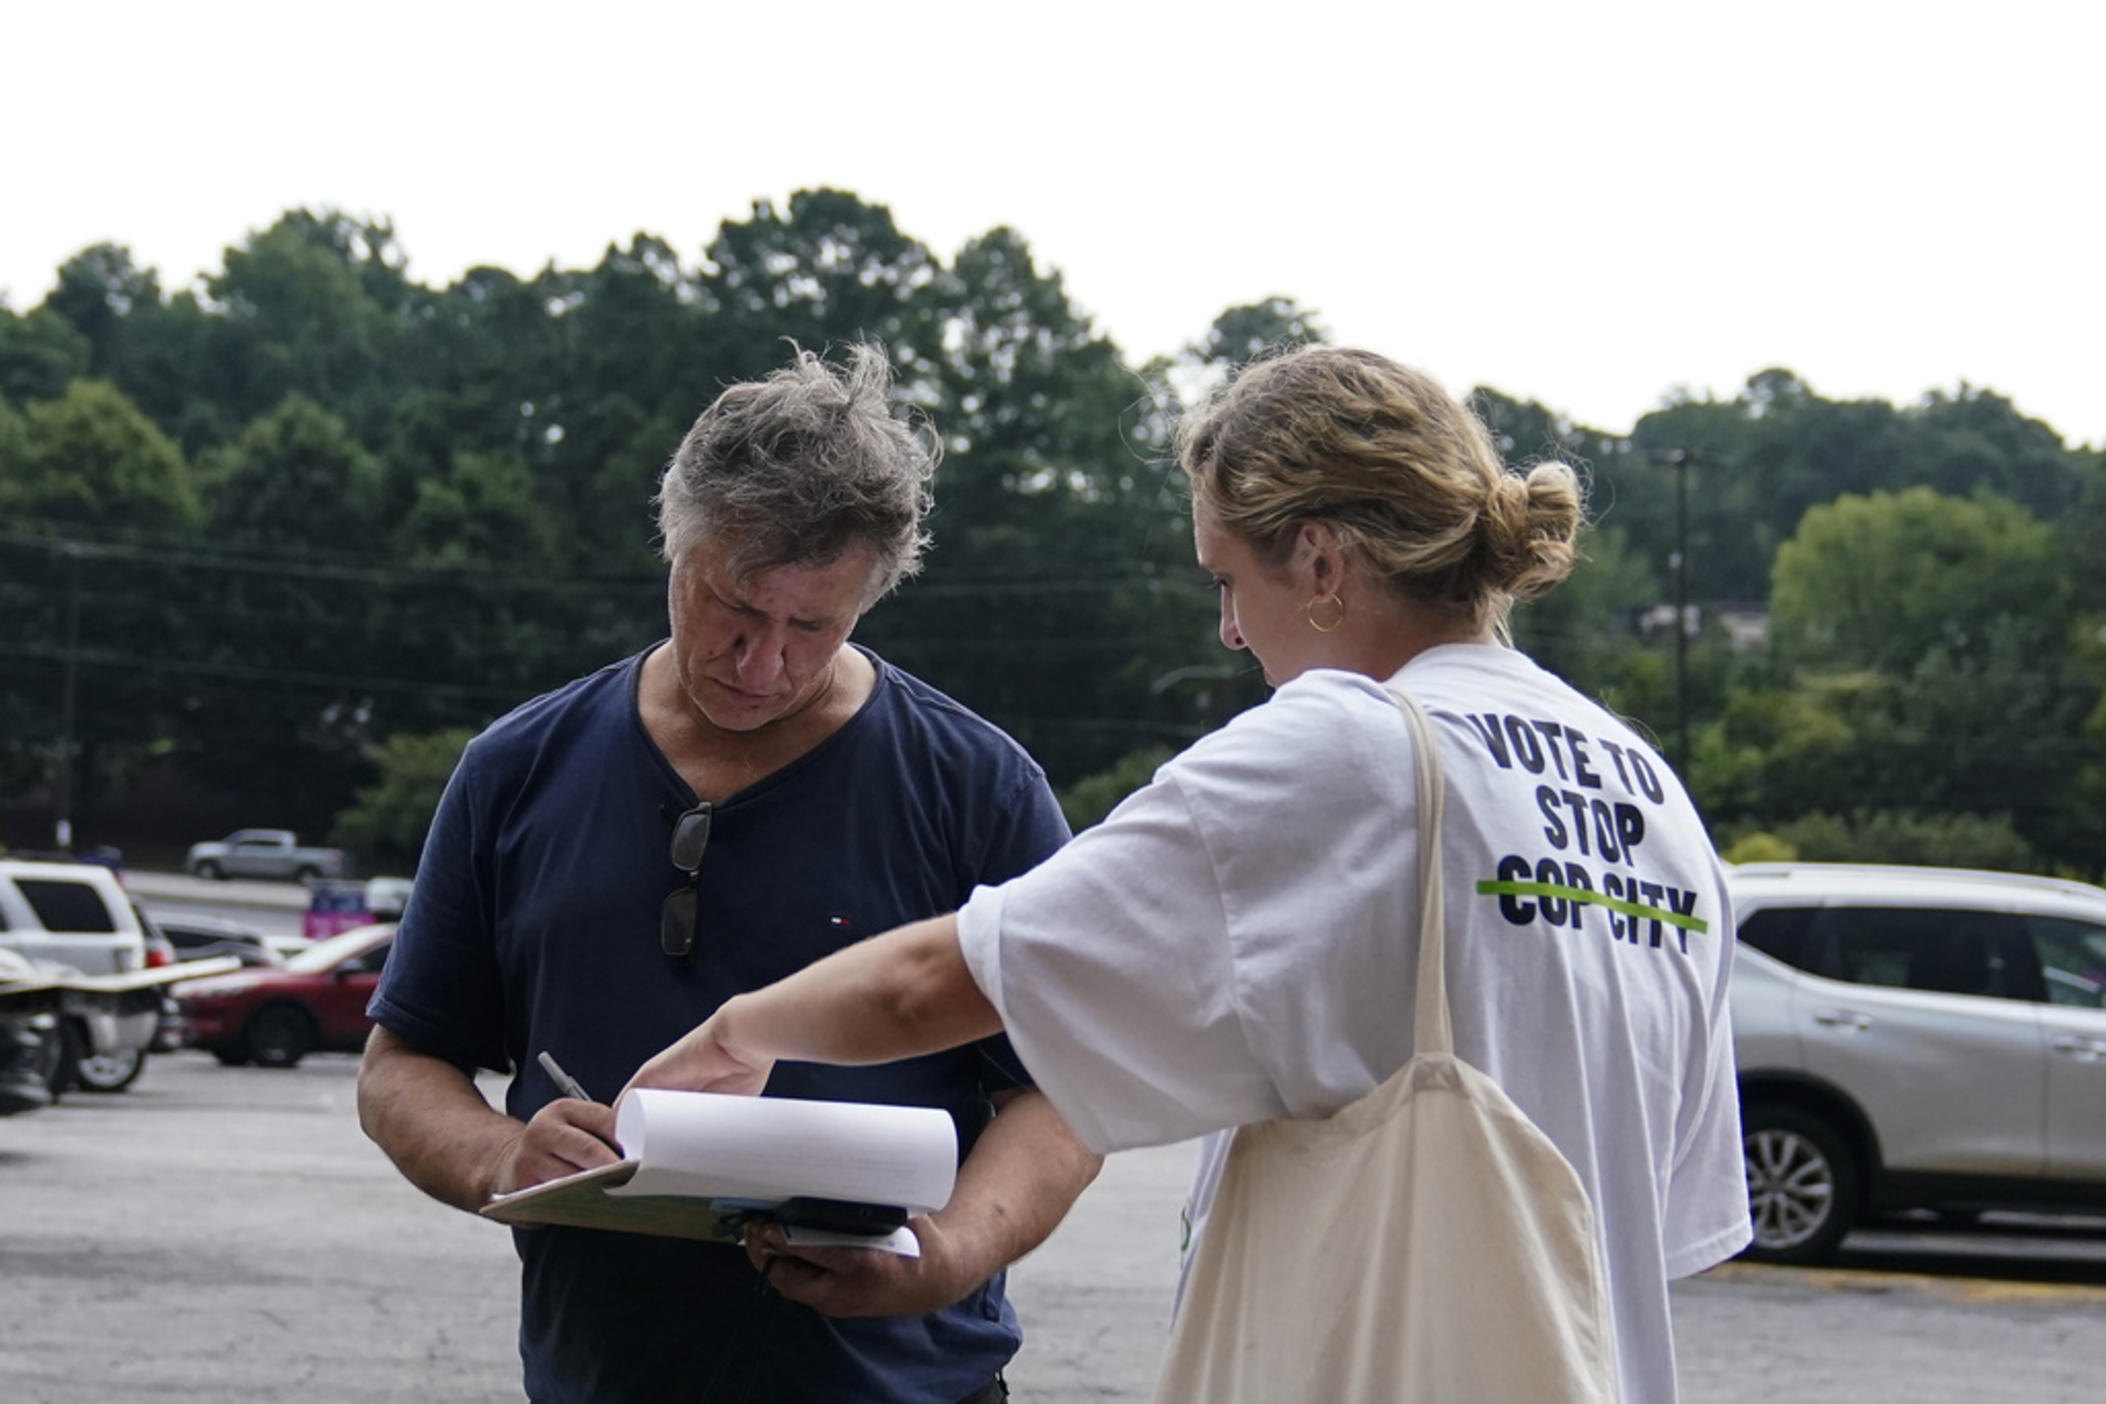 Canvasser Sienna Giraldi, 26, right, talks to an Atlanta resident, left, Thursday, July 20, 2023, in Atlanta. Activists with the Stop Cop City Vote Coalition are trying to get the signatures of more than 70,000 Atlanta residents by Aug. 14 to force a referendum allowing voters to decide the fate of a proposed police and firefighter training center.